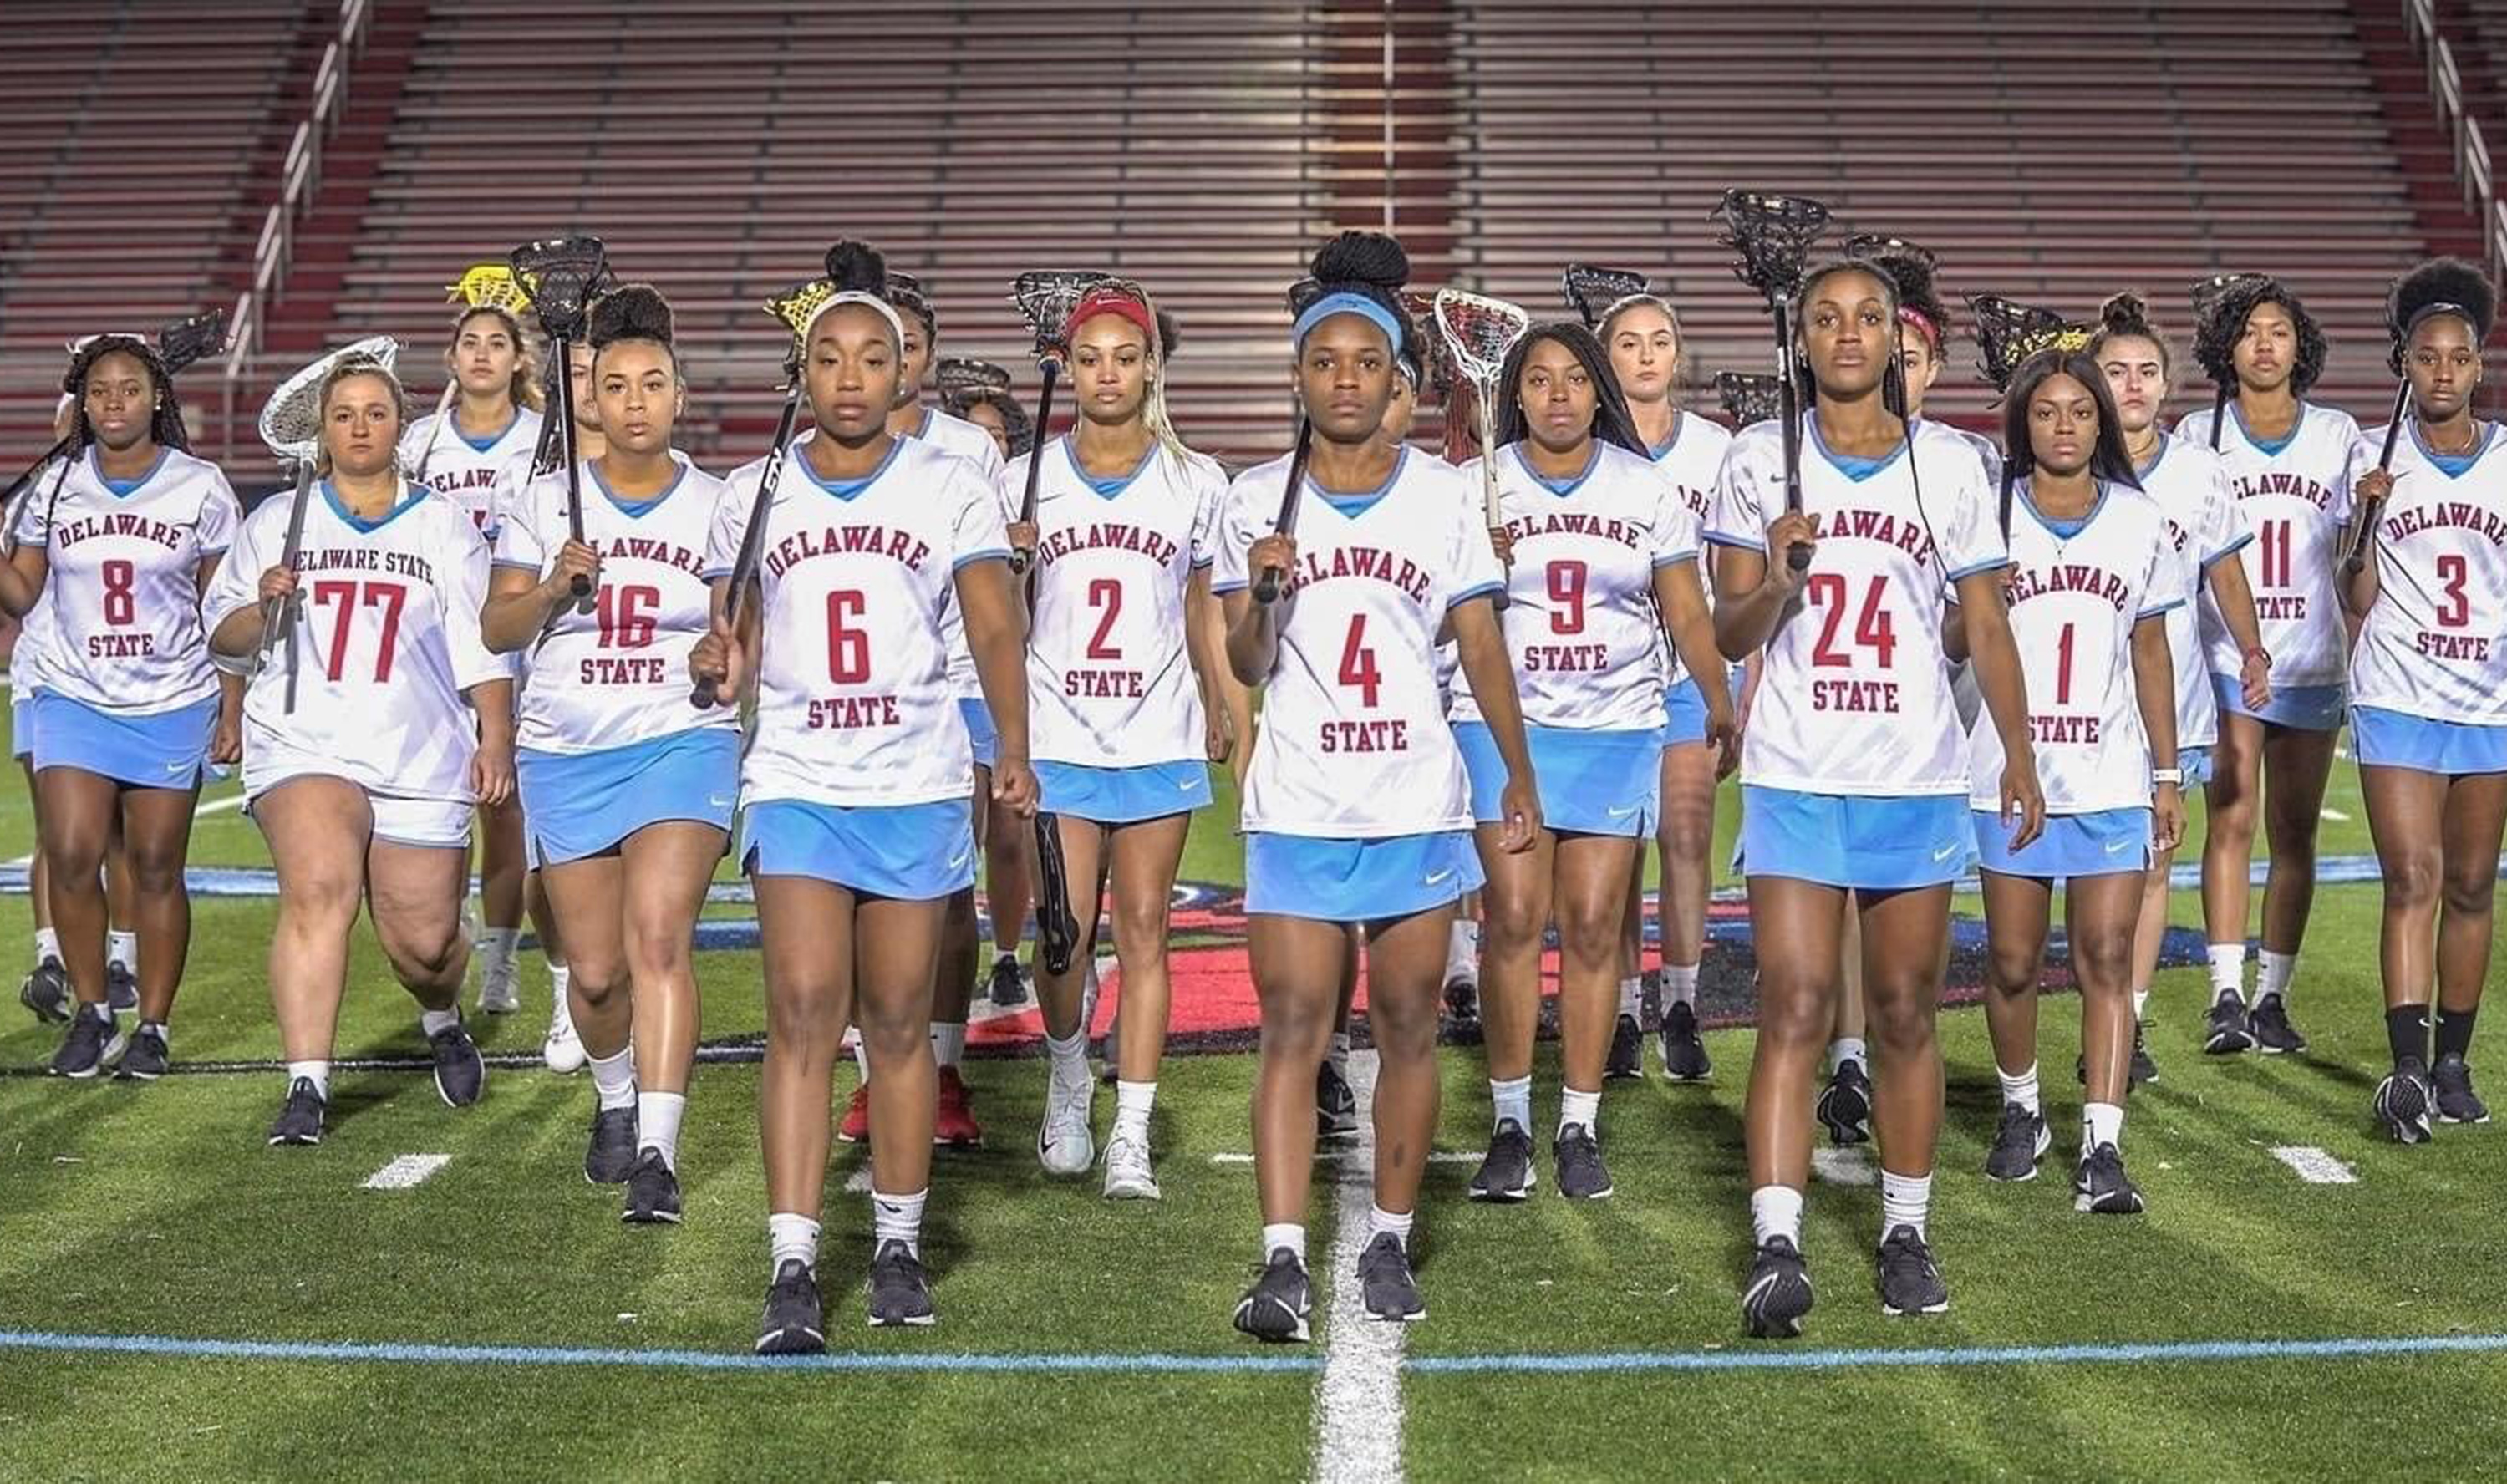 University President Tony Allen says a complaint will be filed with the Civil Rights Division of the U.S. Department of Justice over the "constitutionally dubious" stop and search of a charter bus carrying the University's Women's Lacrosse Team in Georgia by that state's Liberty County Sheriff's Department.